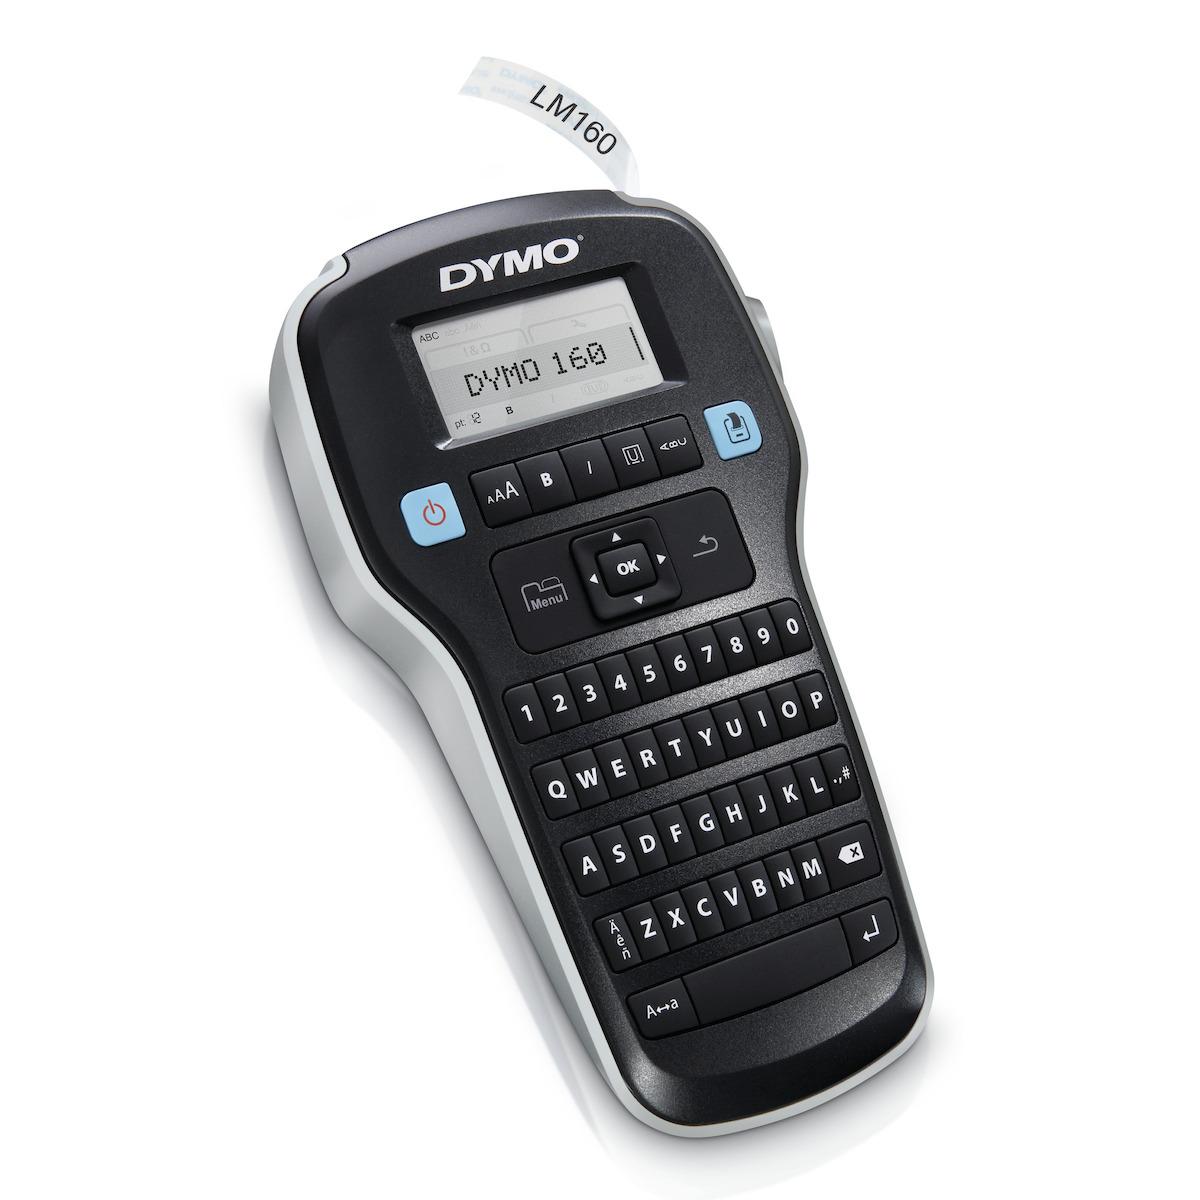 One-Tou … Details about   DYMO Label Maker LabelManager 160 Portable Label Maker Easy-to-Use 